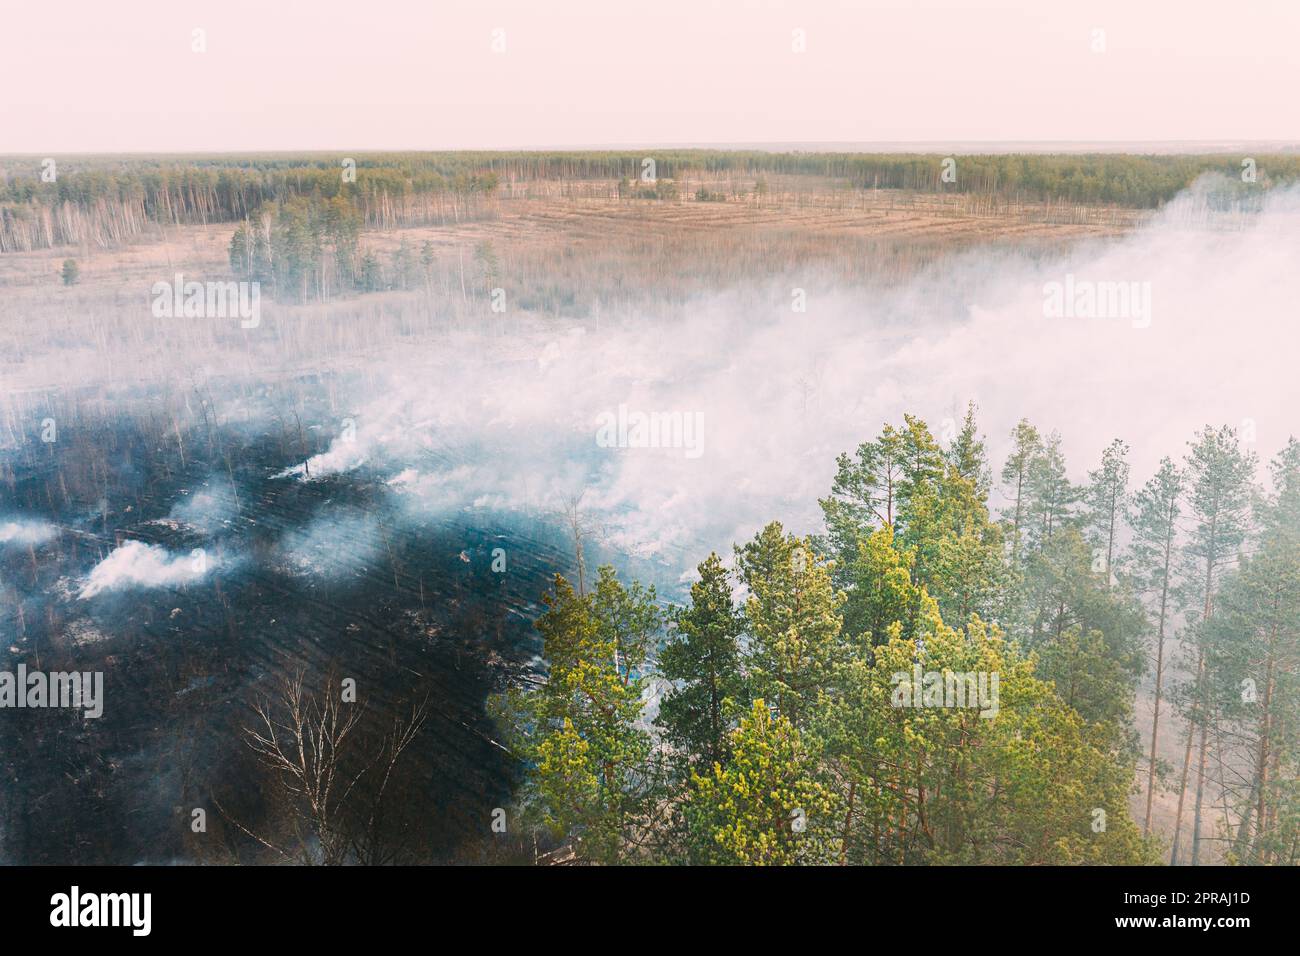 Aerial View. Spring Dry Grass Burns During Drought Hot Weather. Bush Fire And Smoke In Deforestation Zone. Wild Open Fire Destroys Grass. Nature In Danger. Ecological Problem Air Pollution Stock Photo